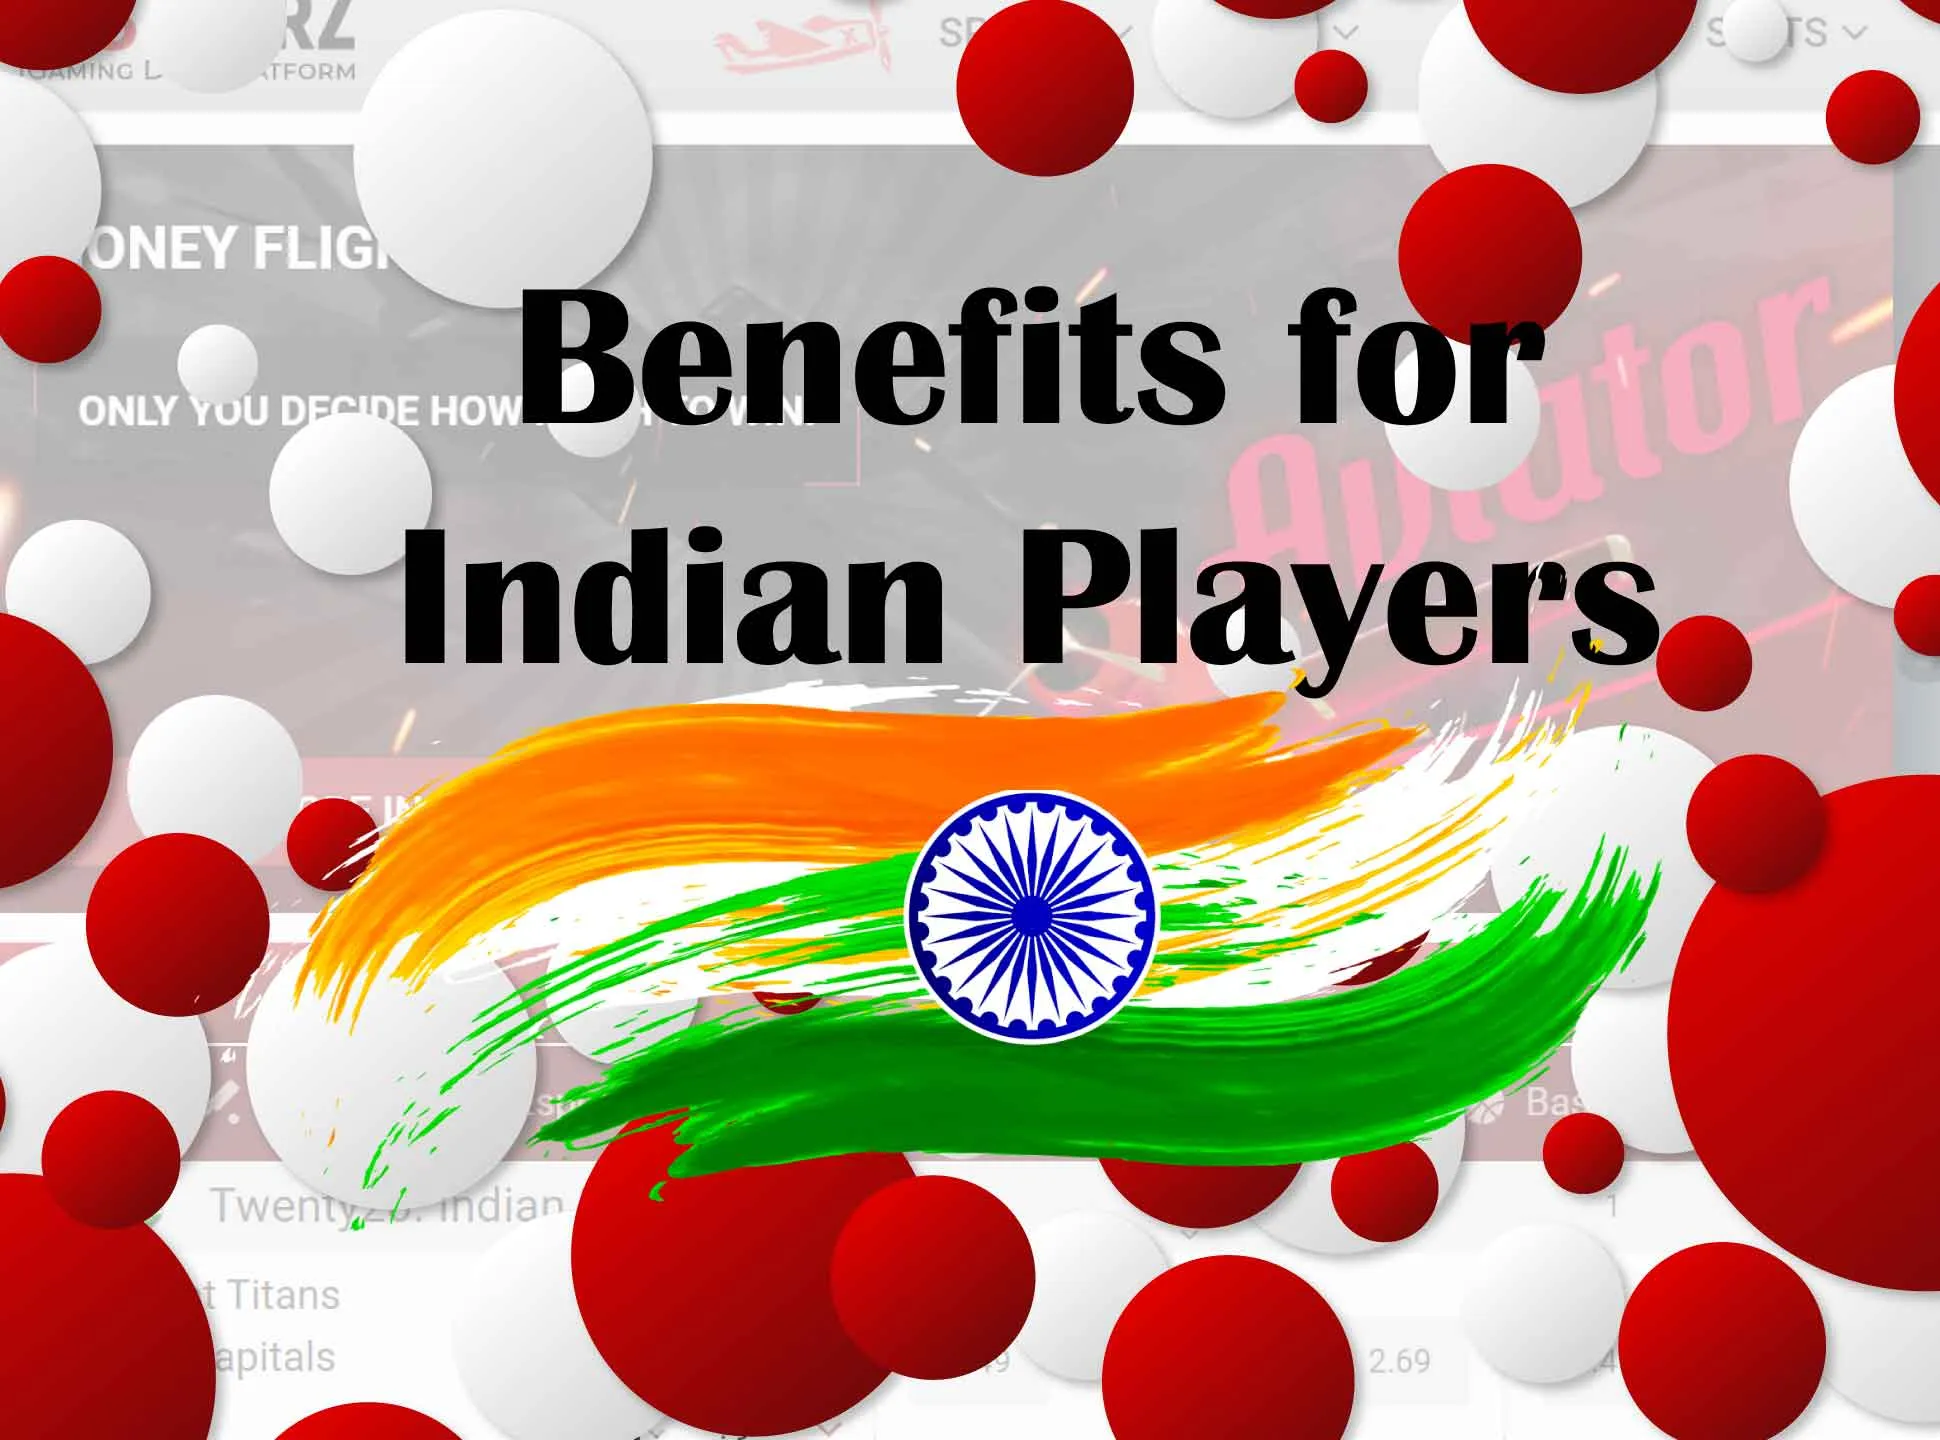 888starz supports Hindi and appreciate Indian players.